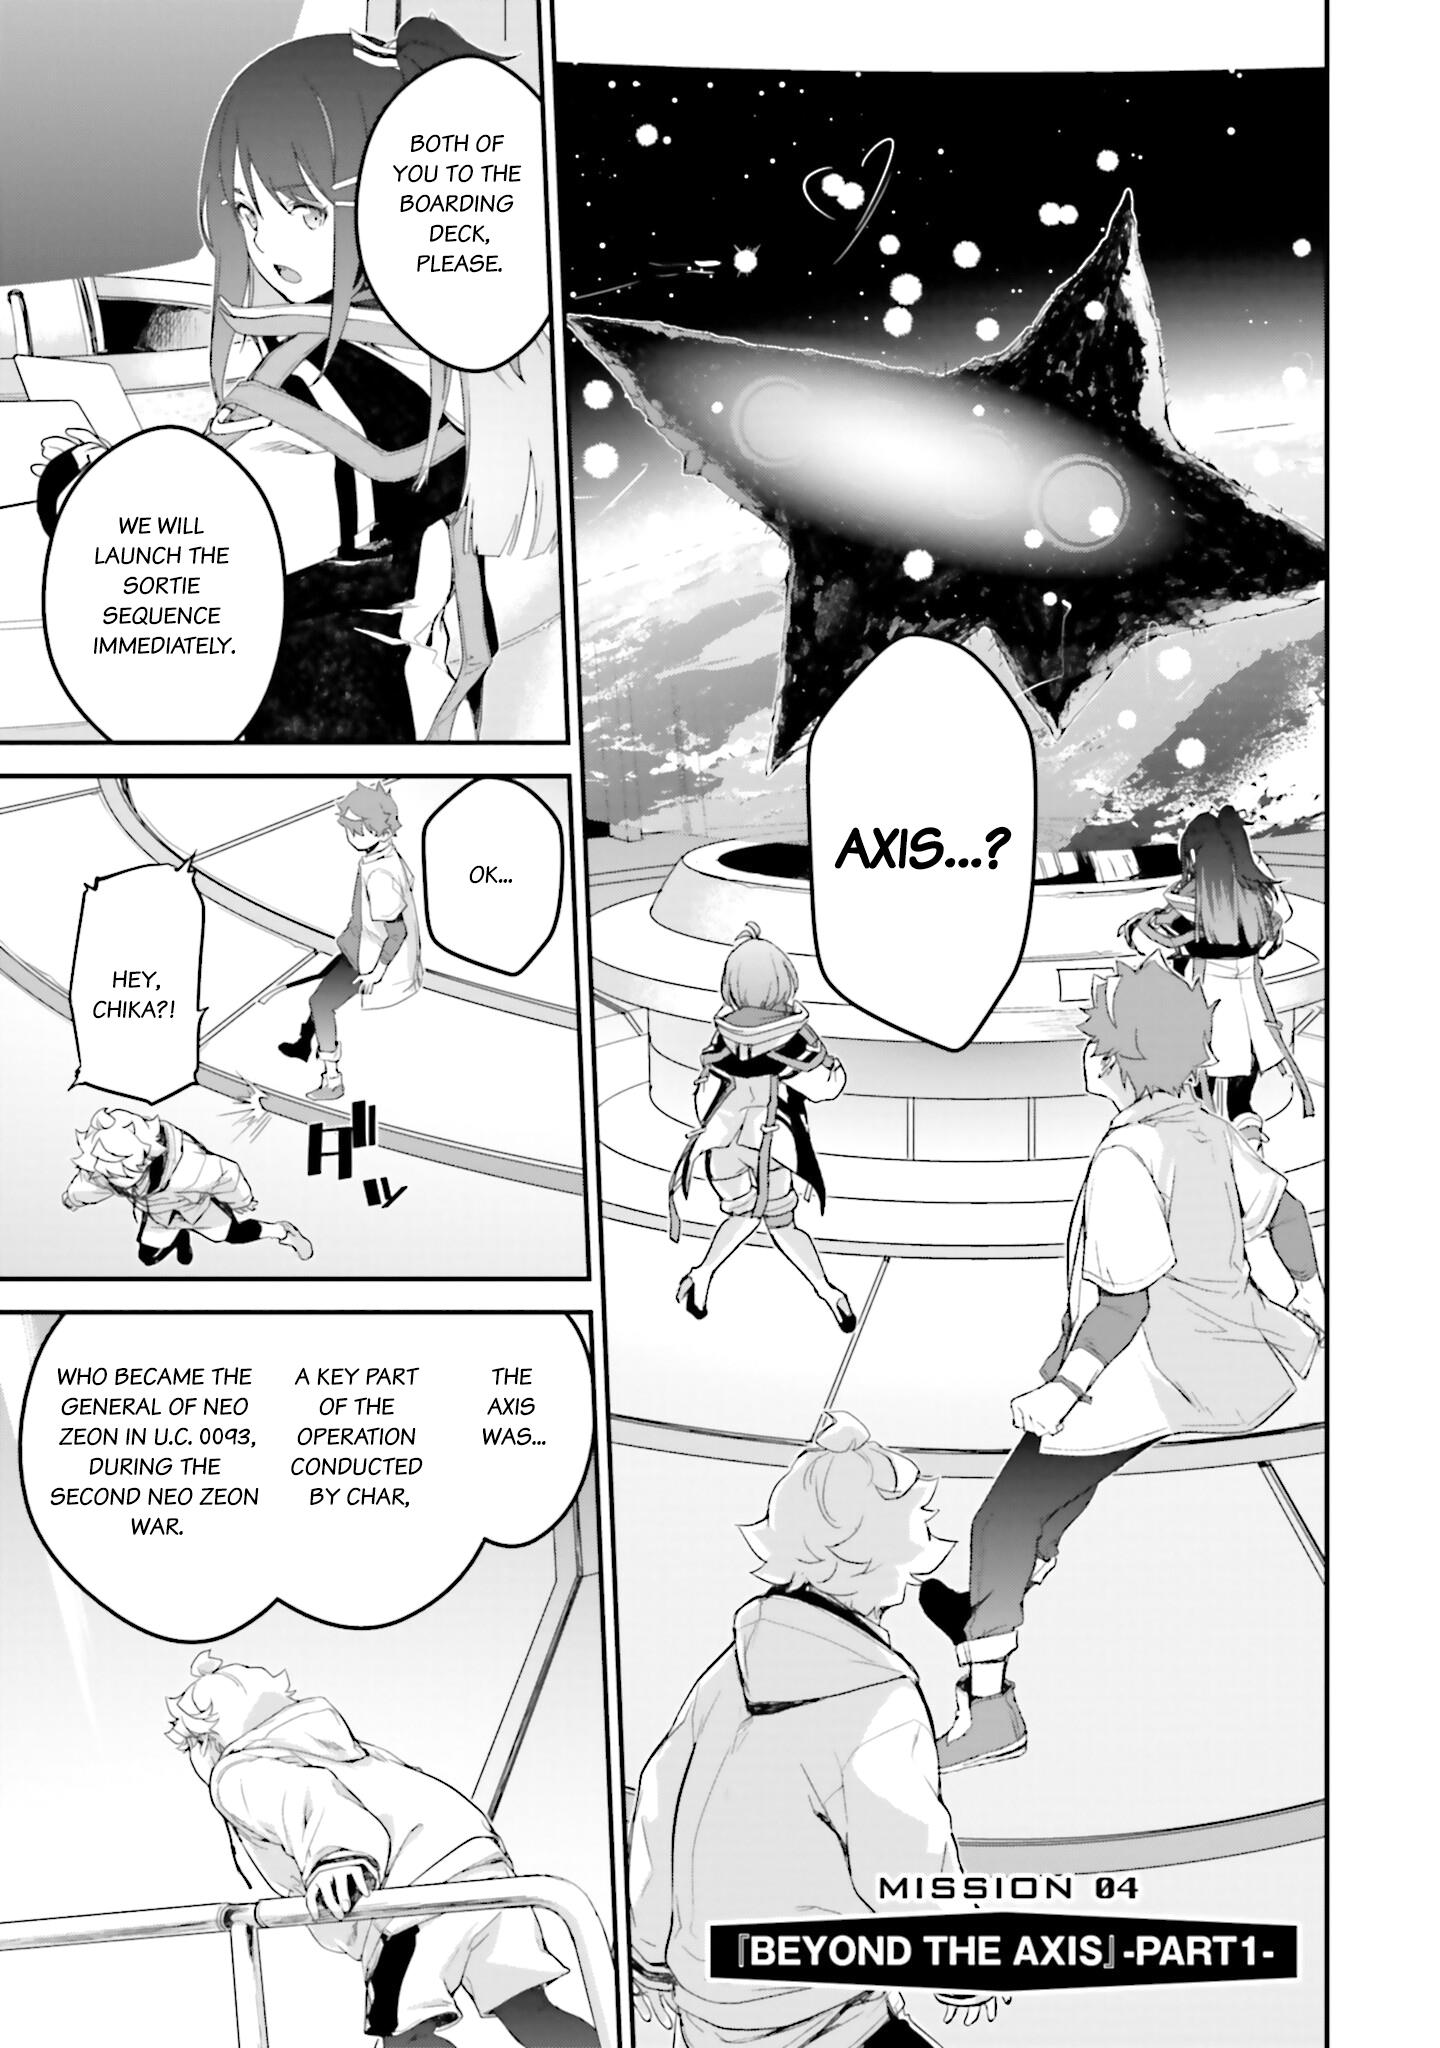 Mobile Suit Gundam N-Extreme Vol.1 Chapter 4: Mission 4 [Beyond The Axis]-Part 1- - Picture 1